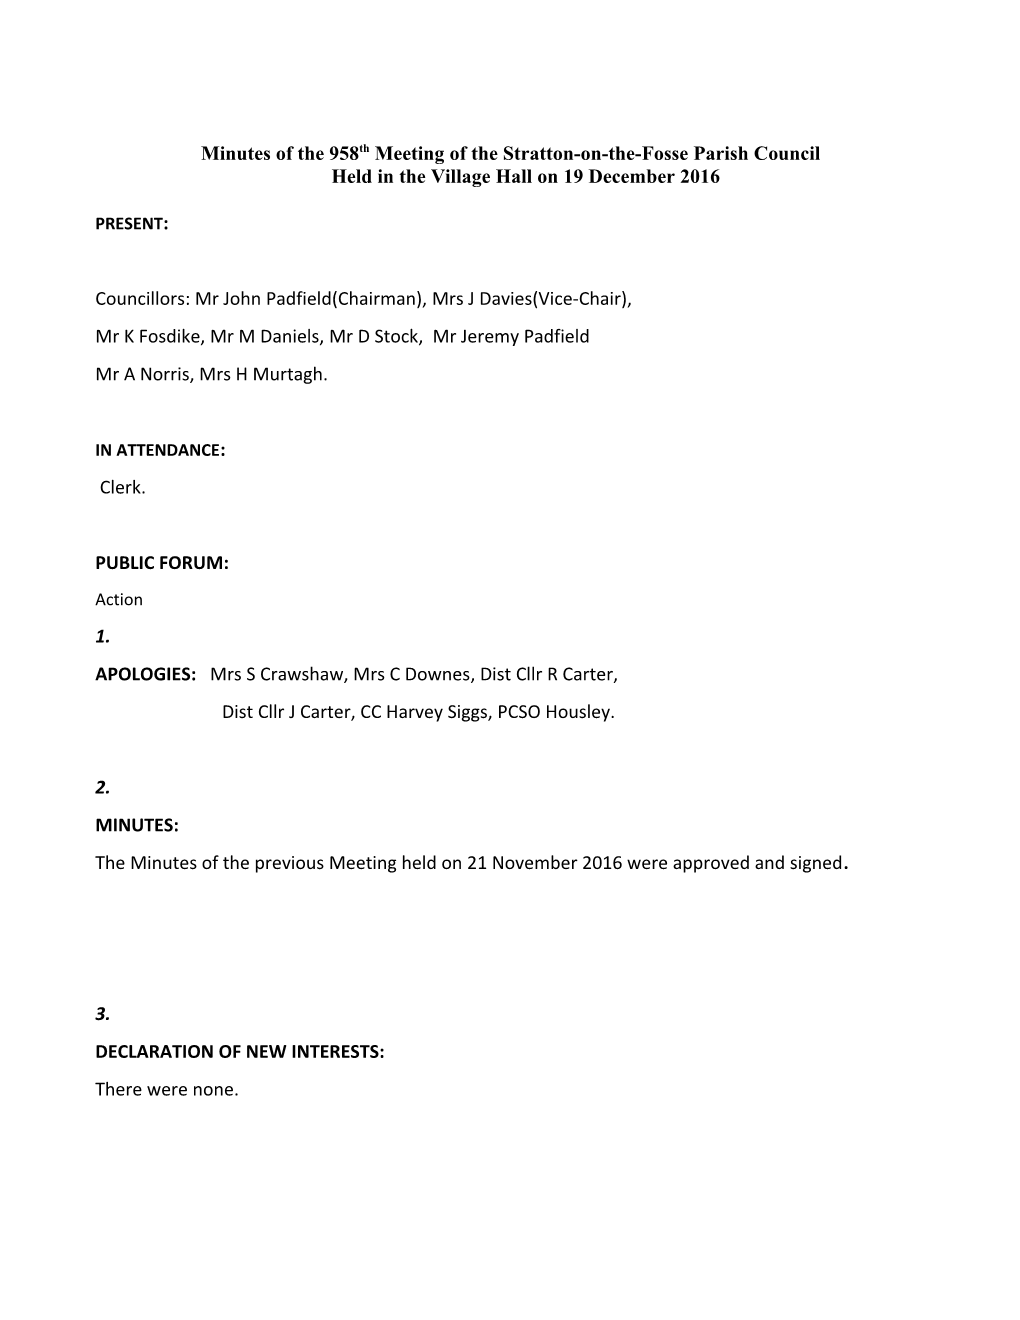 Minutes of the 958Th Meeting of the Stratton-On-The-Fosse Parish Council